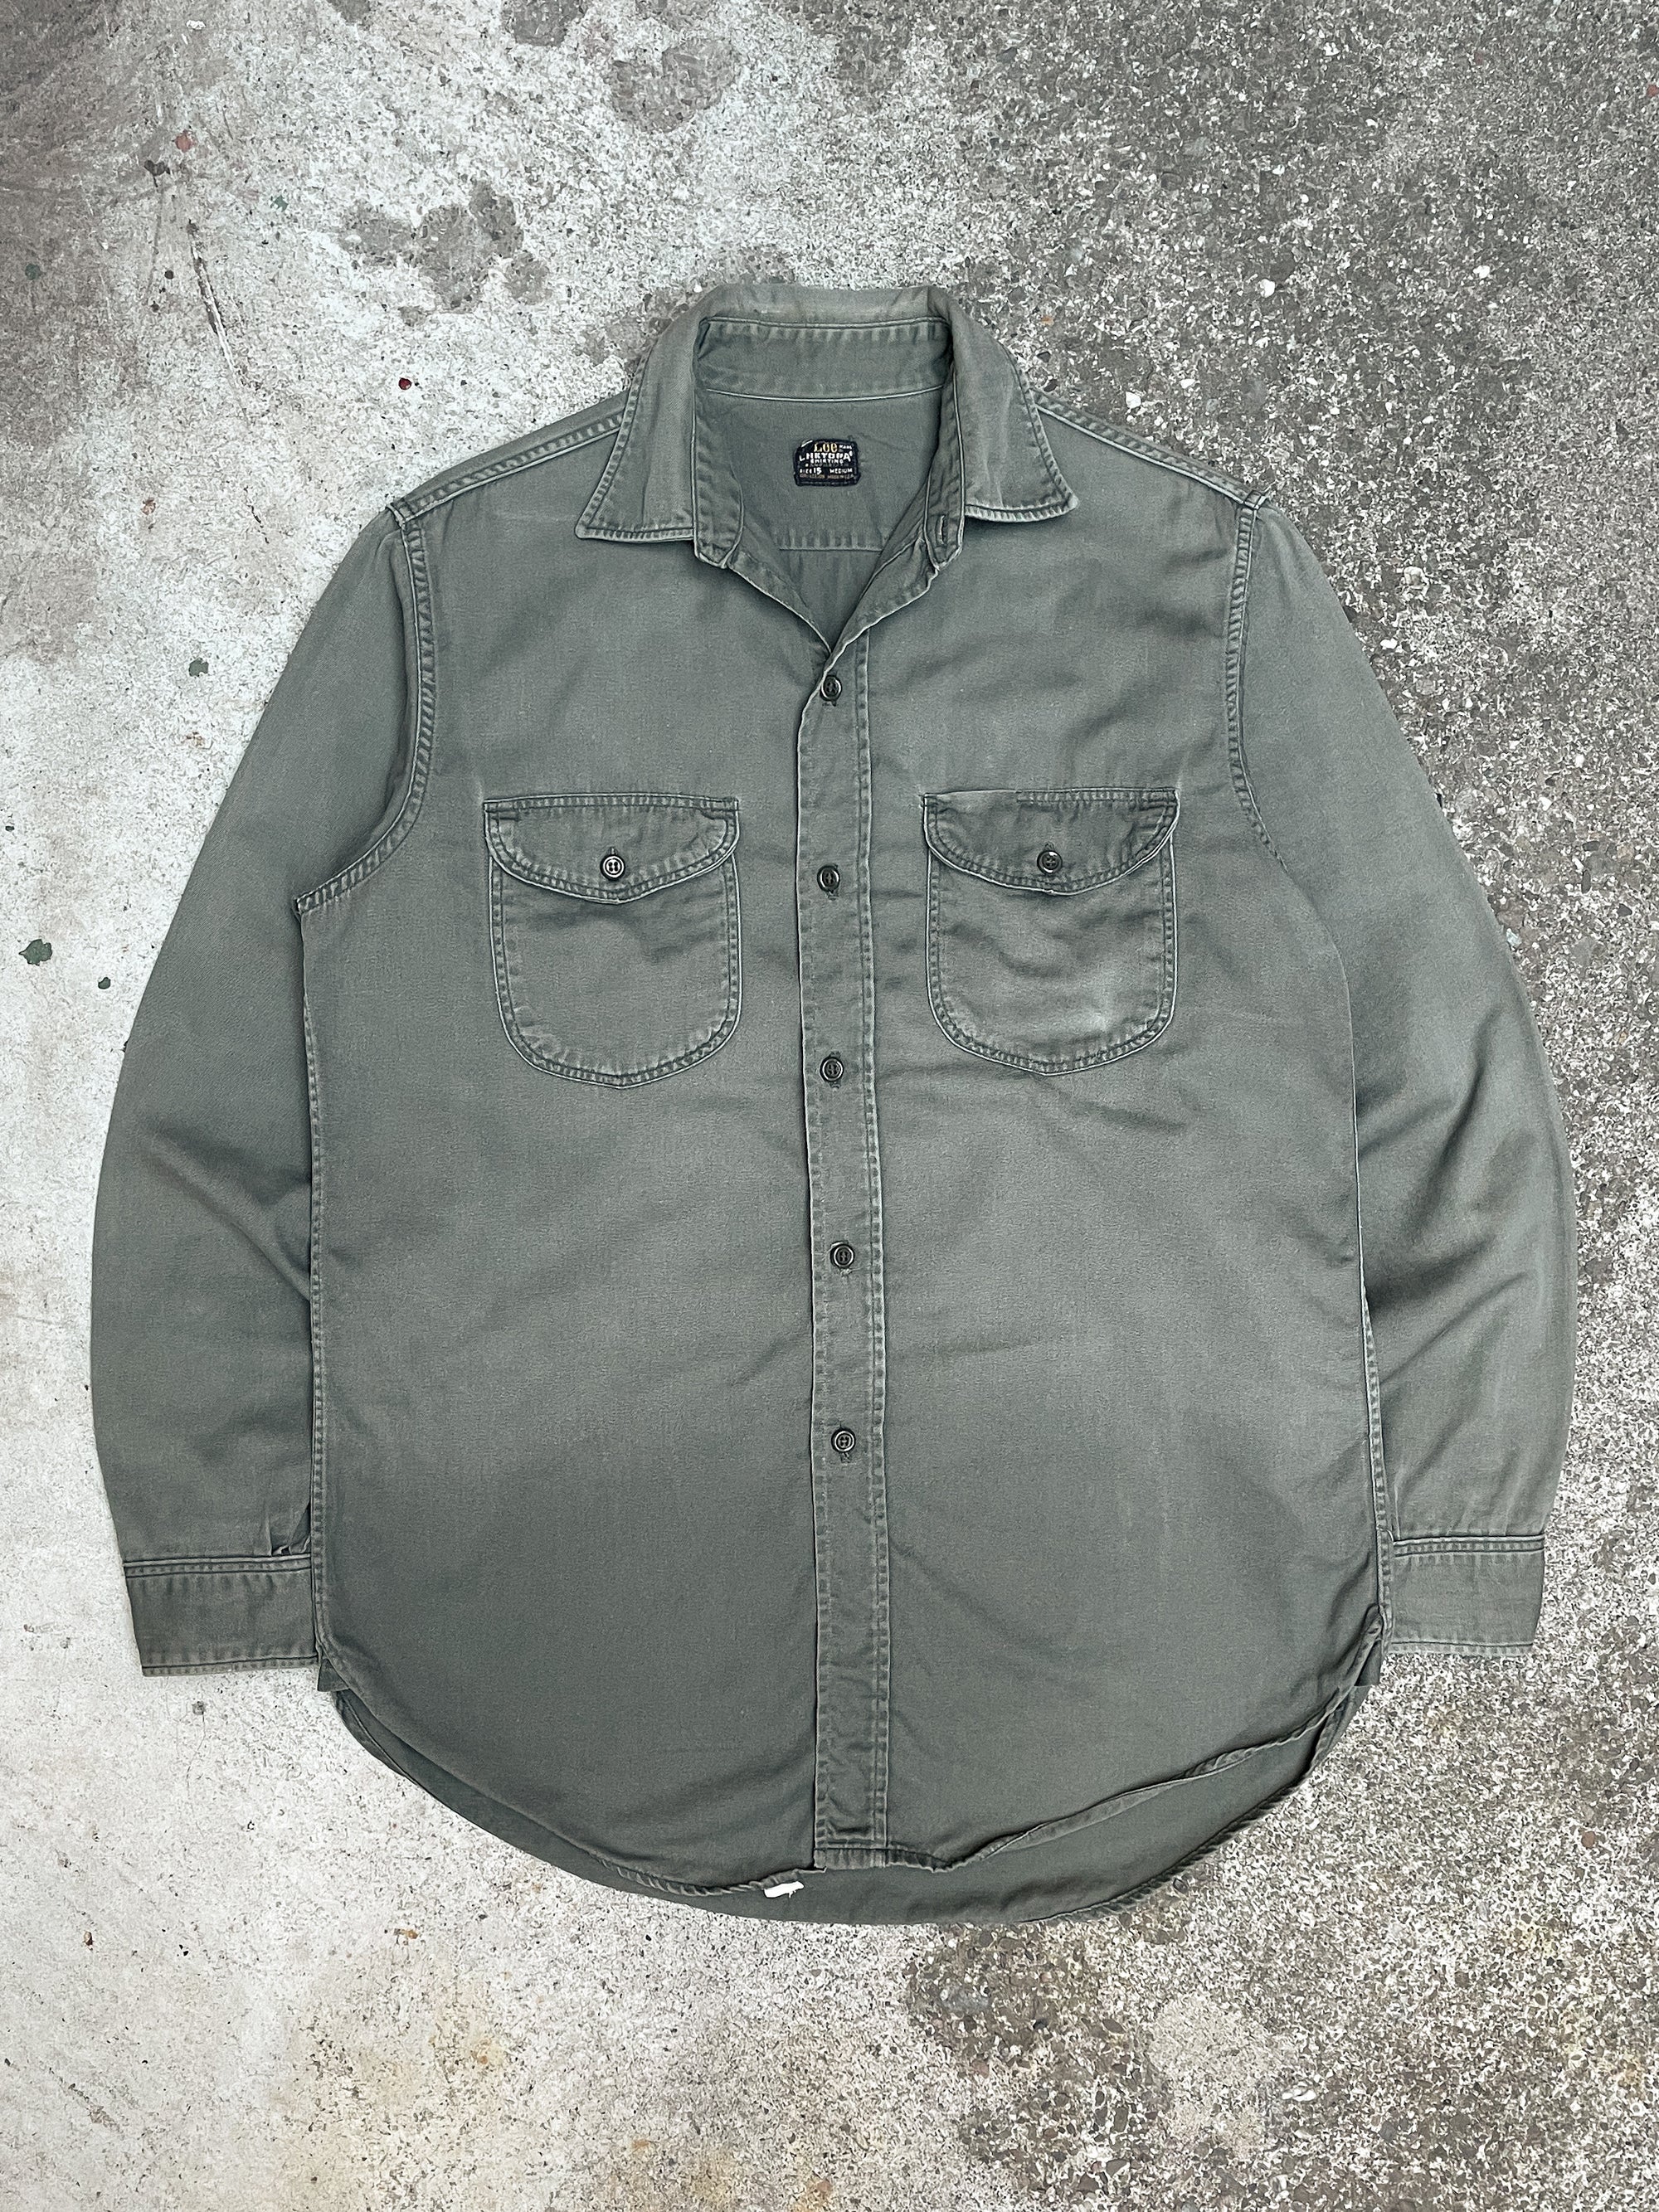 1960s Lee Faded Green Work Shirt (M)